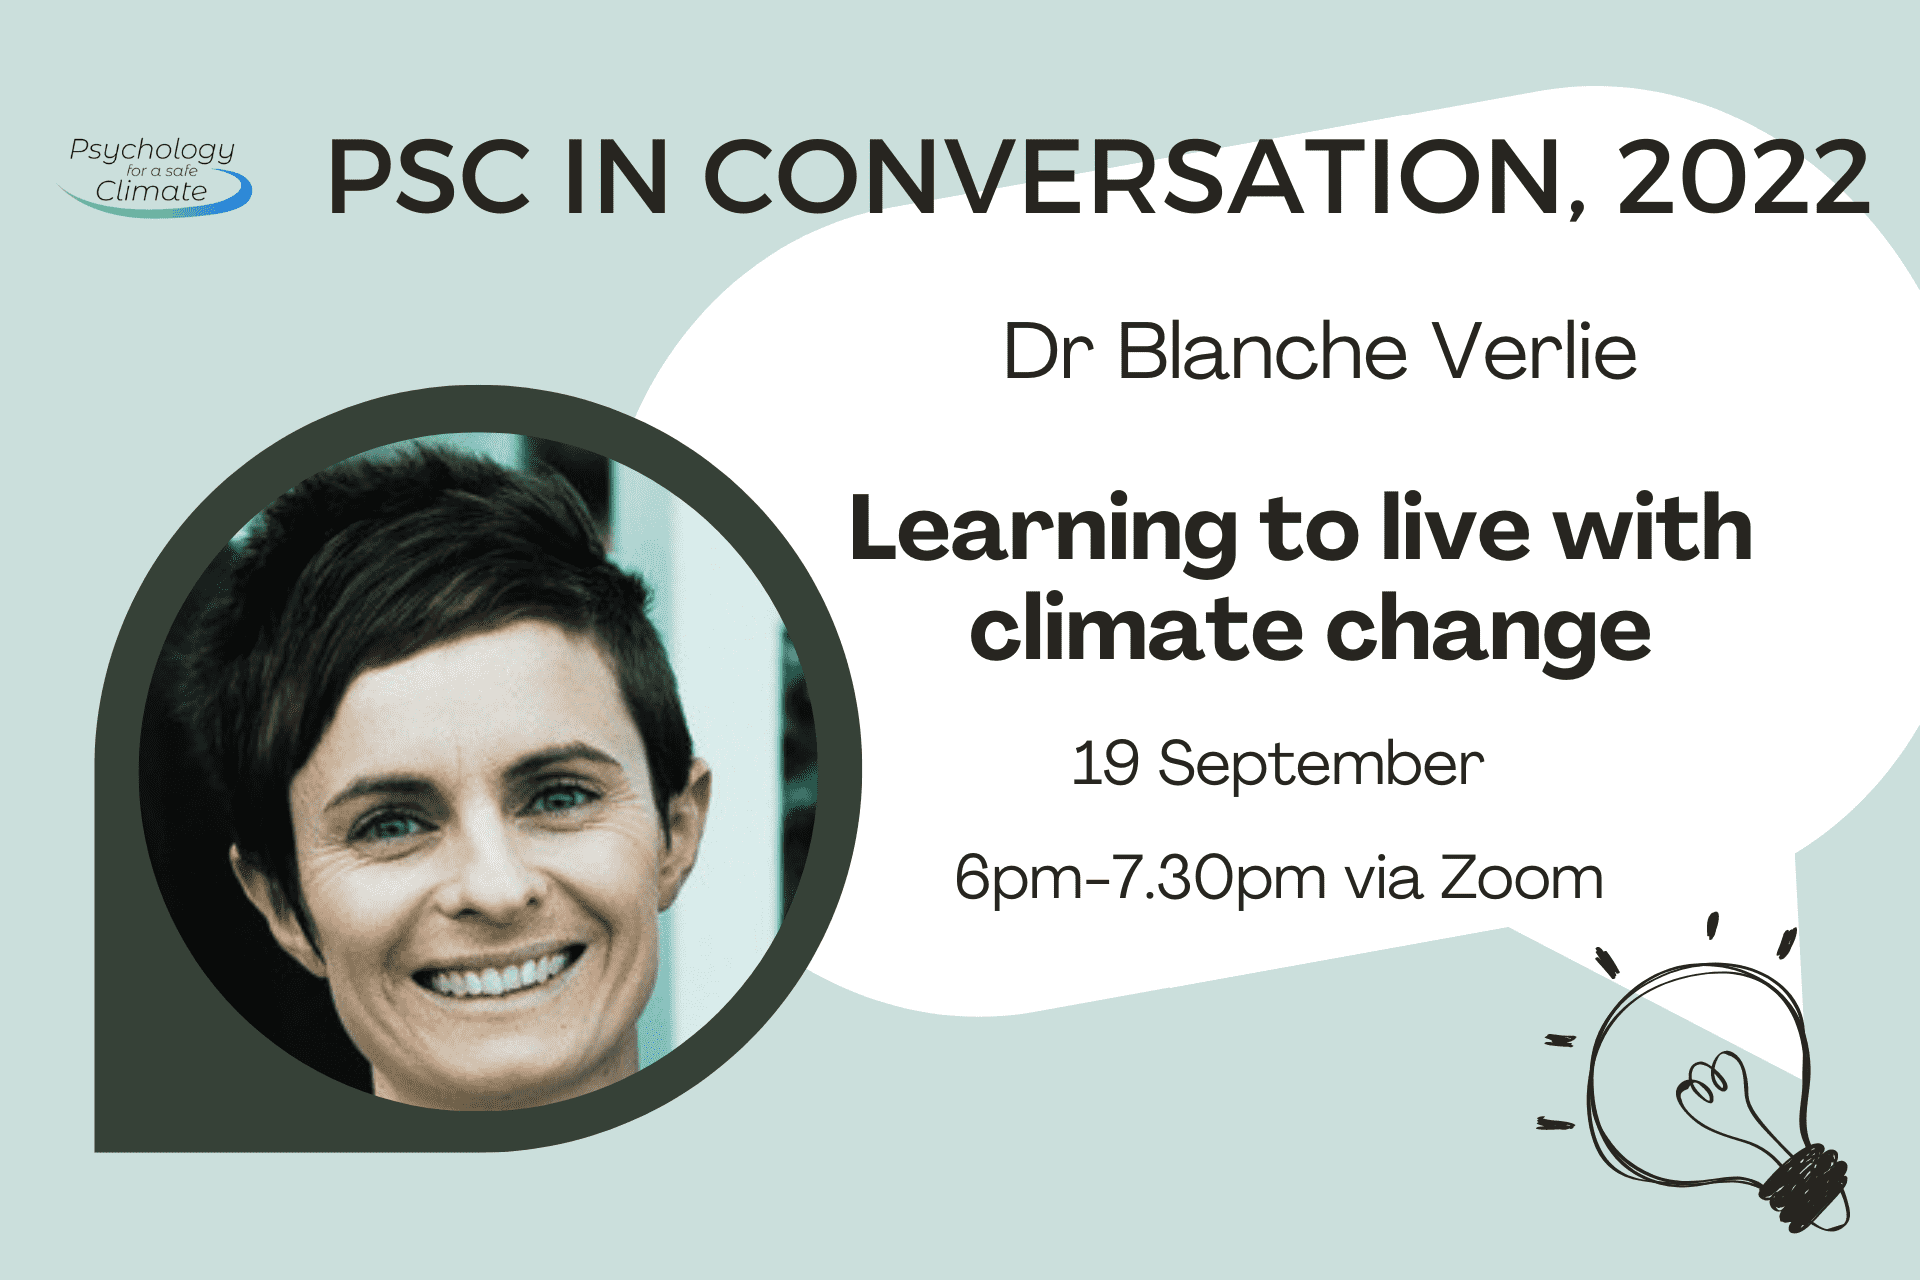 PSC in Conversation with Dr Blanche Verlie: Learning to Live with Climate Change